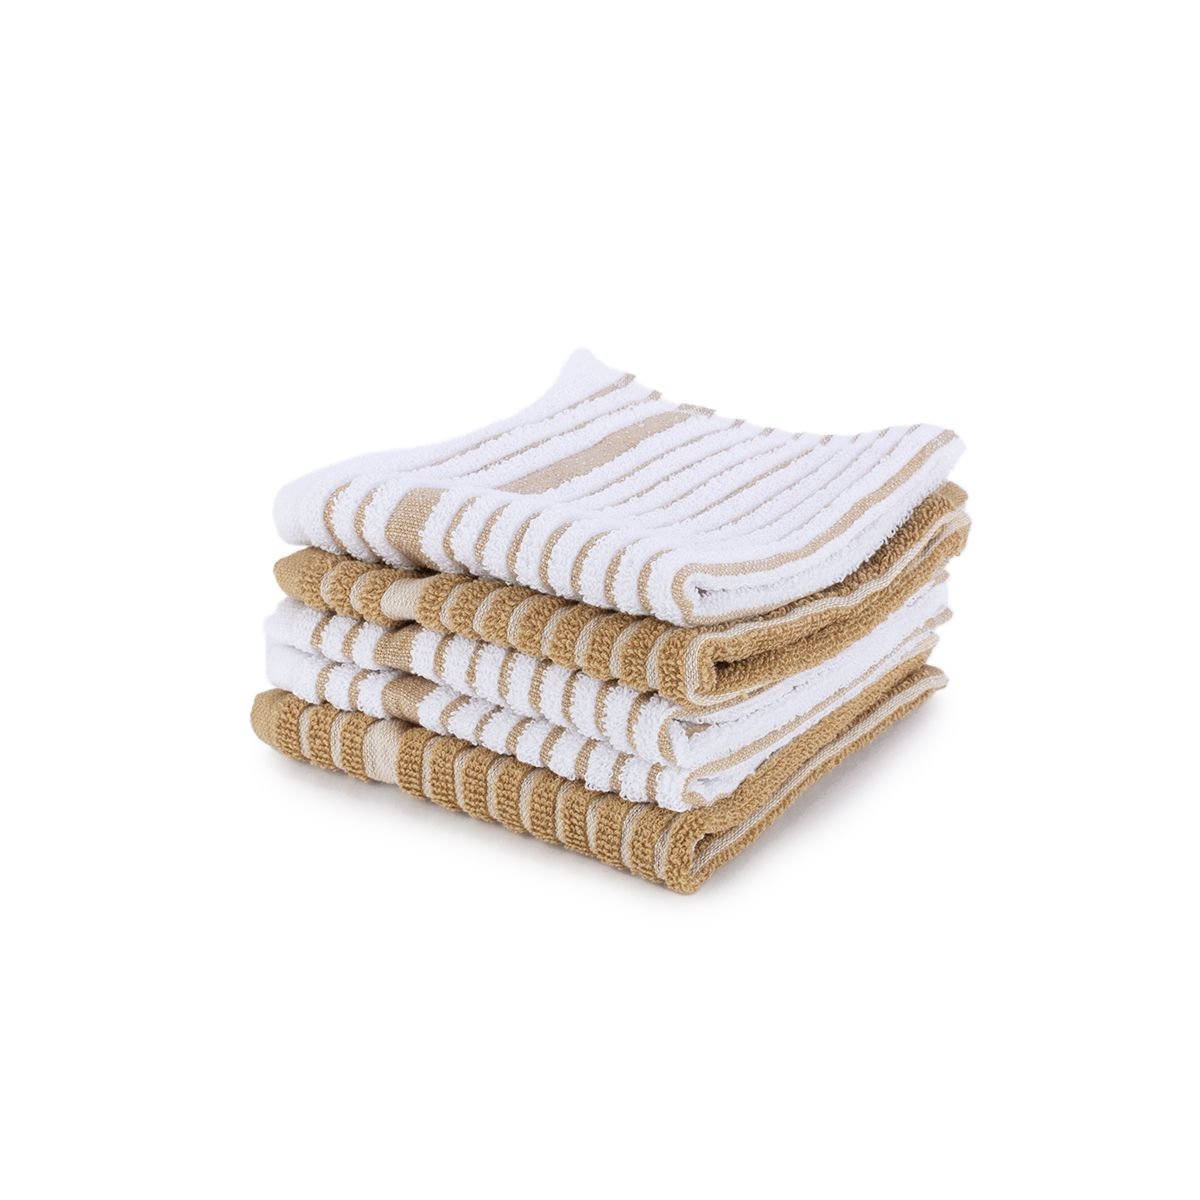 Everything Kitchens Modern Essentials Oversized Recycled Cotton Terry Kitchen Dish Cloths (Set of 5) | Tan & White